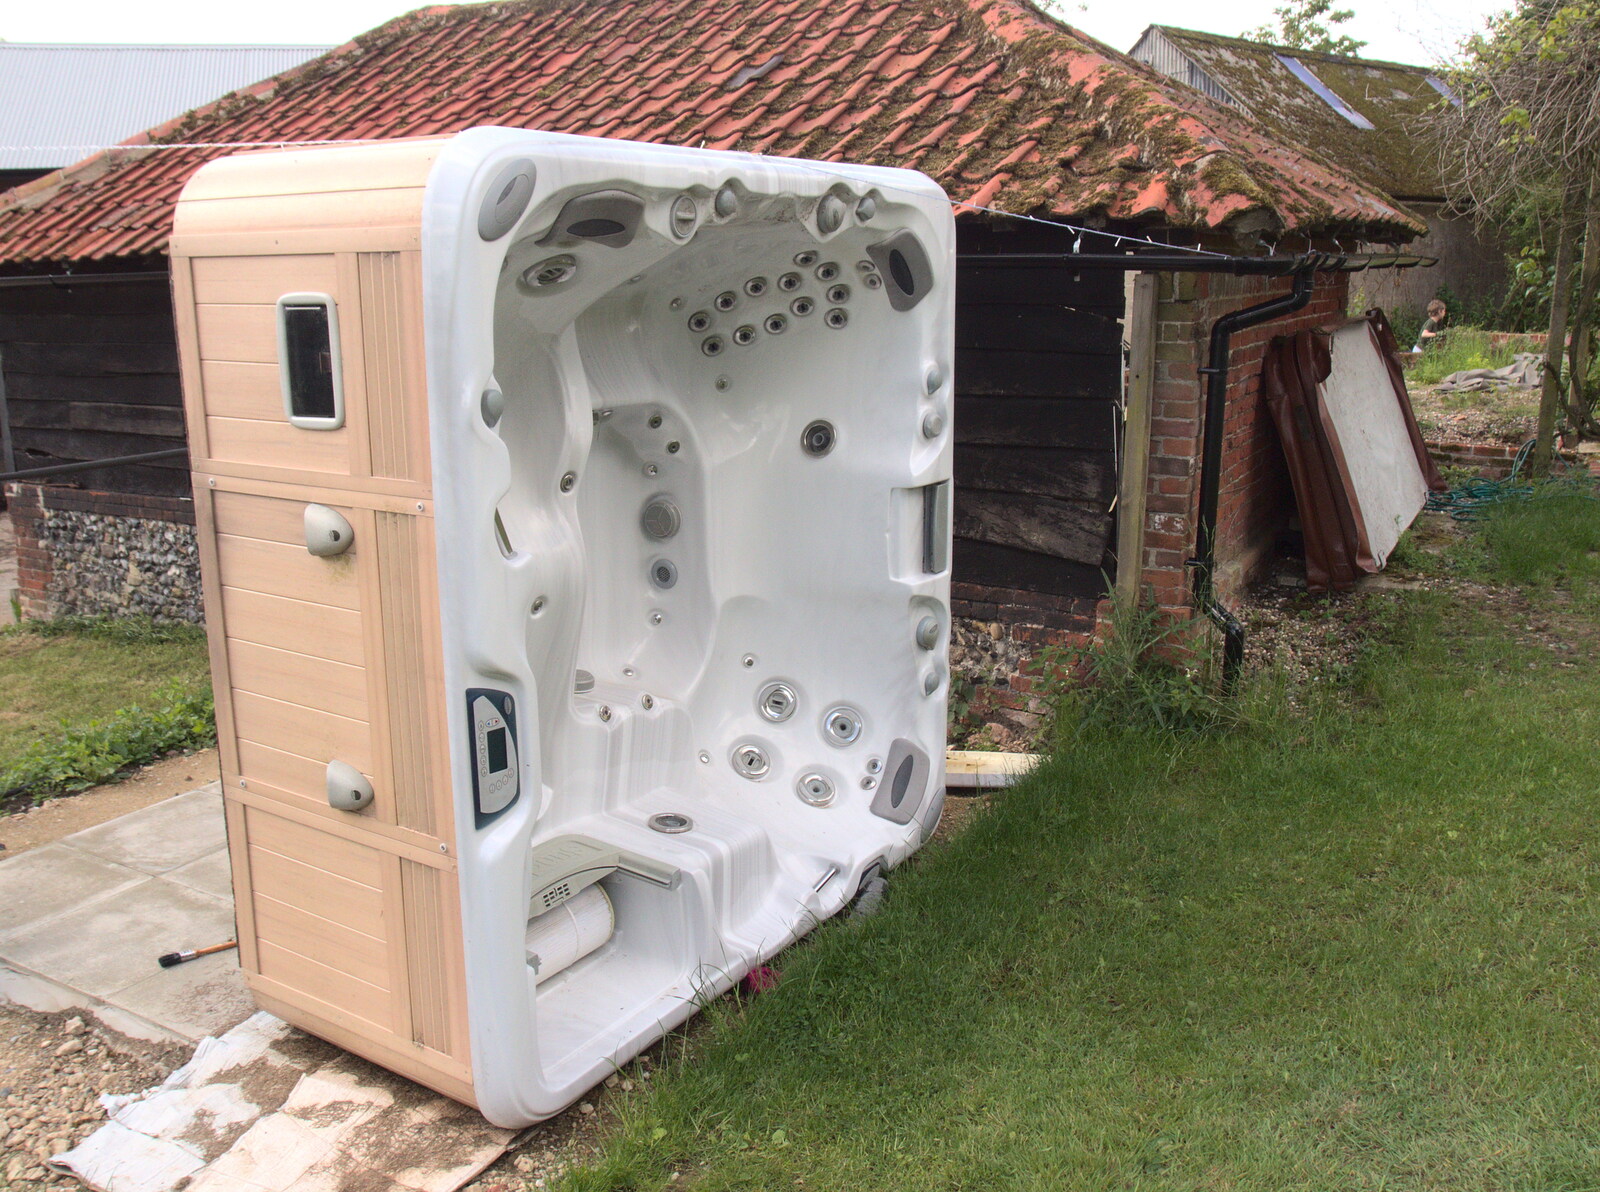 Hot-tub time machine, on its side from Clive and Suzanne's Party, Braisworth, Suffolk - 21st May 2017